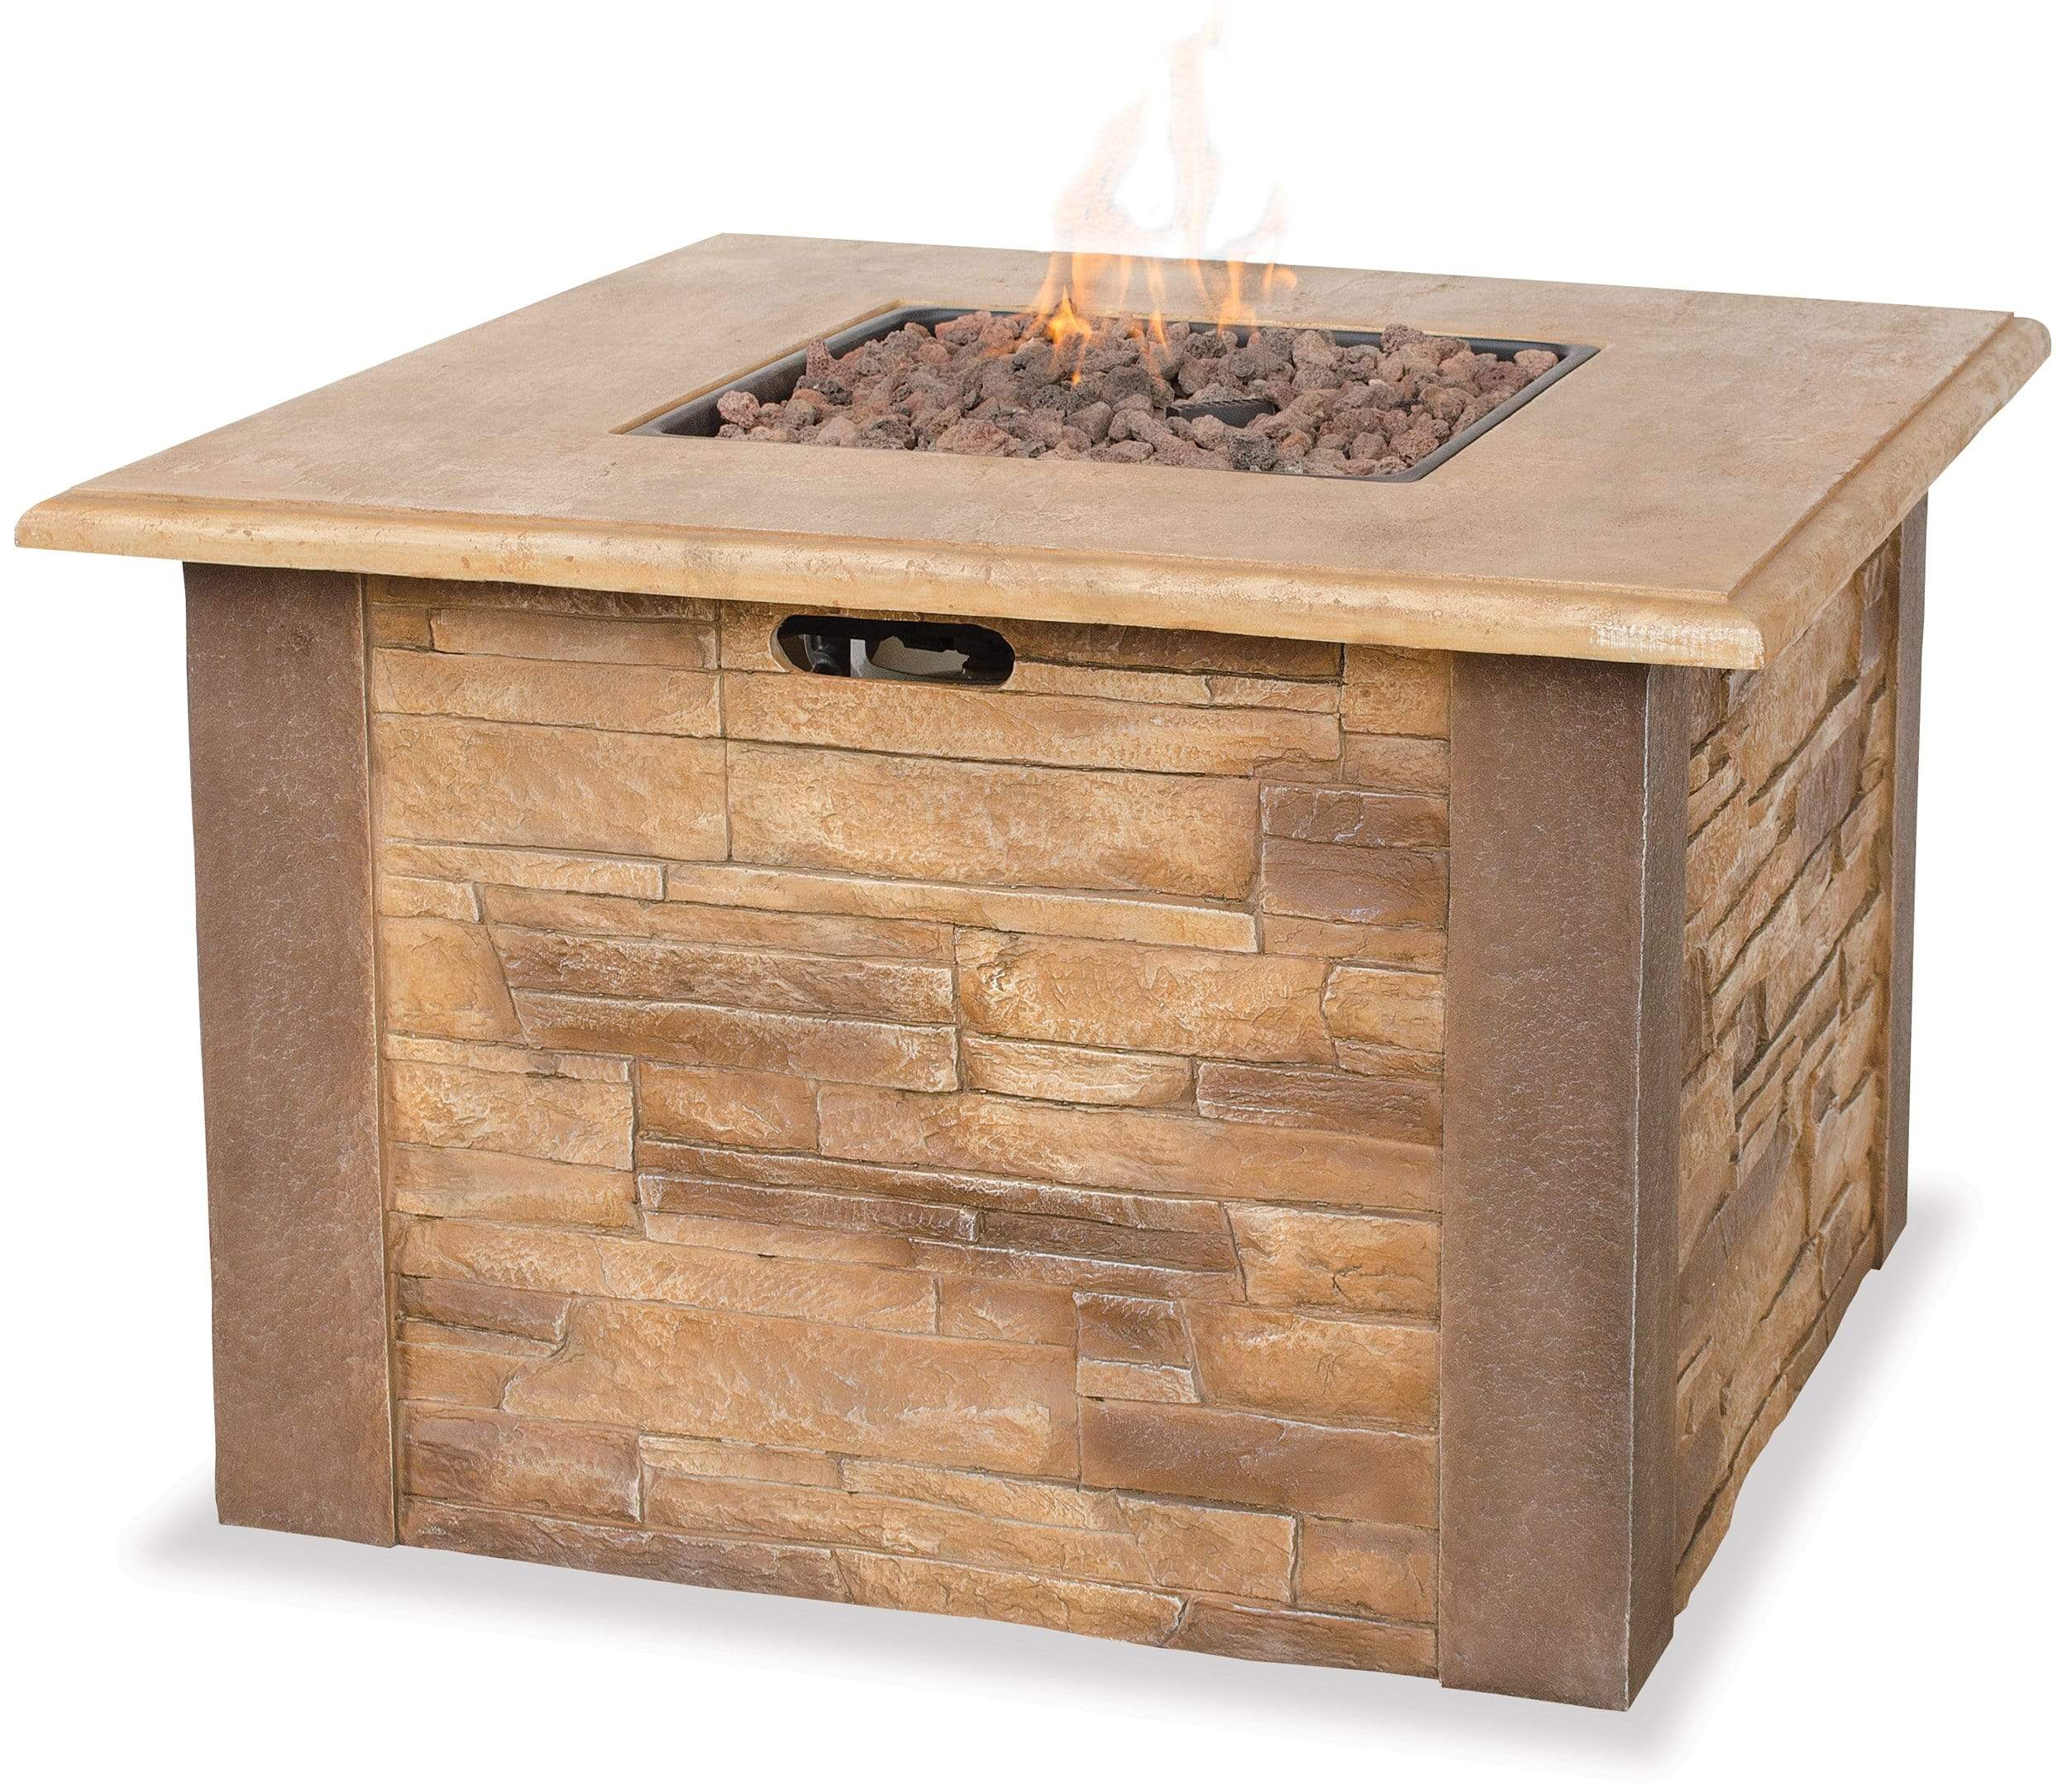 Endless Summer Fire Pit LP Gas Outdoor Fire Pit with Faux Stone 36-in Mantel